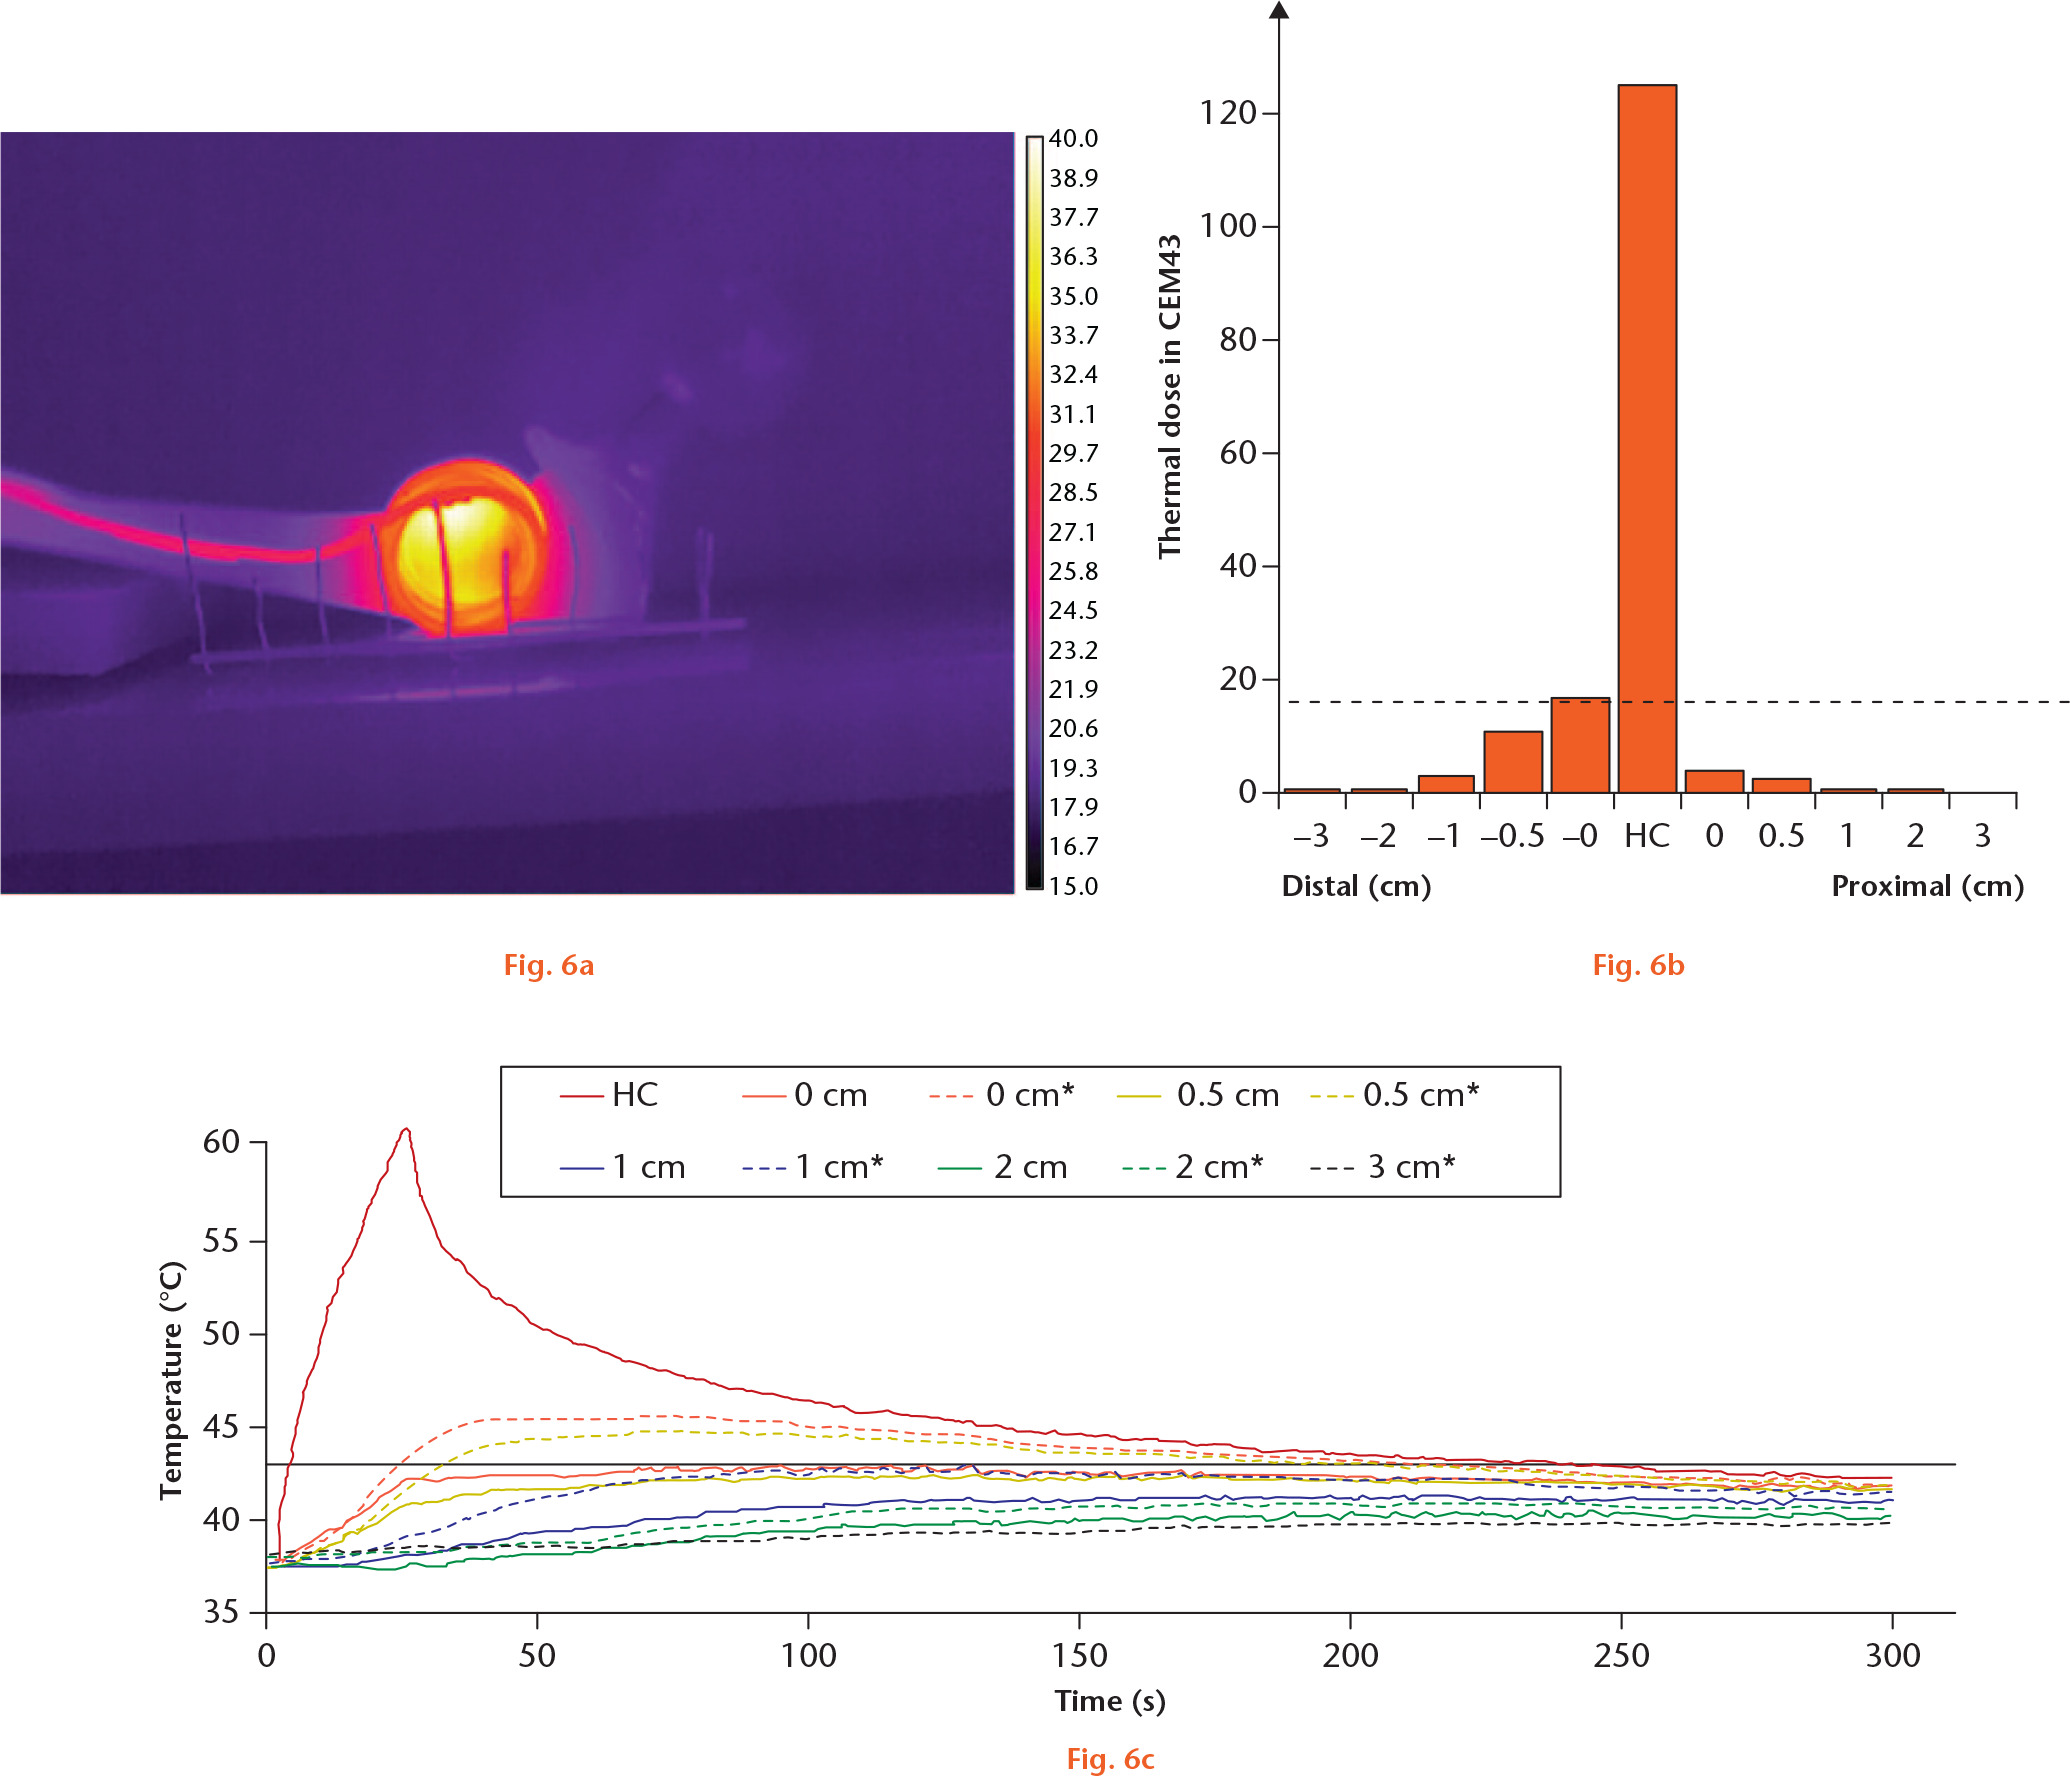  
            Segmental induction heating of hip stem, proximally. a) A thermal image from a thermal camera showing selective heating. The vertical lines have 1 cm spacing. b) A graph showing thermal dose in CEM43 at several distances from the heating centre (HC). The dashed line represents 16 CEM43, the threshold for necrosis of bone. c) A graph showing the temperature at several distances from the HC during the segmental induction heating and thereafter. Dashed lines indicate distal direction.
          